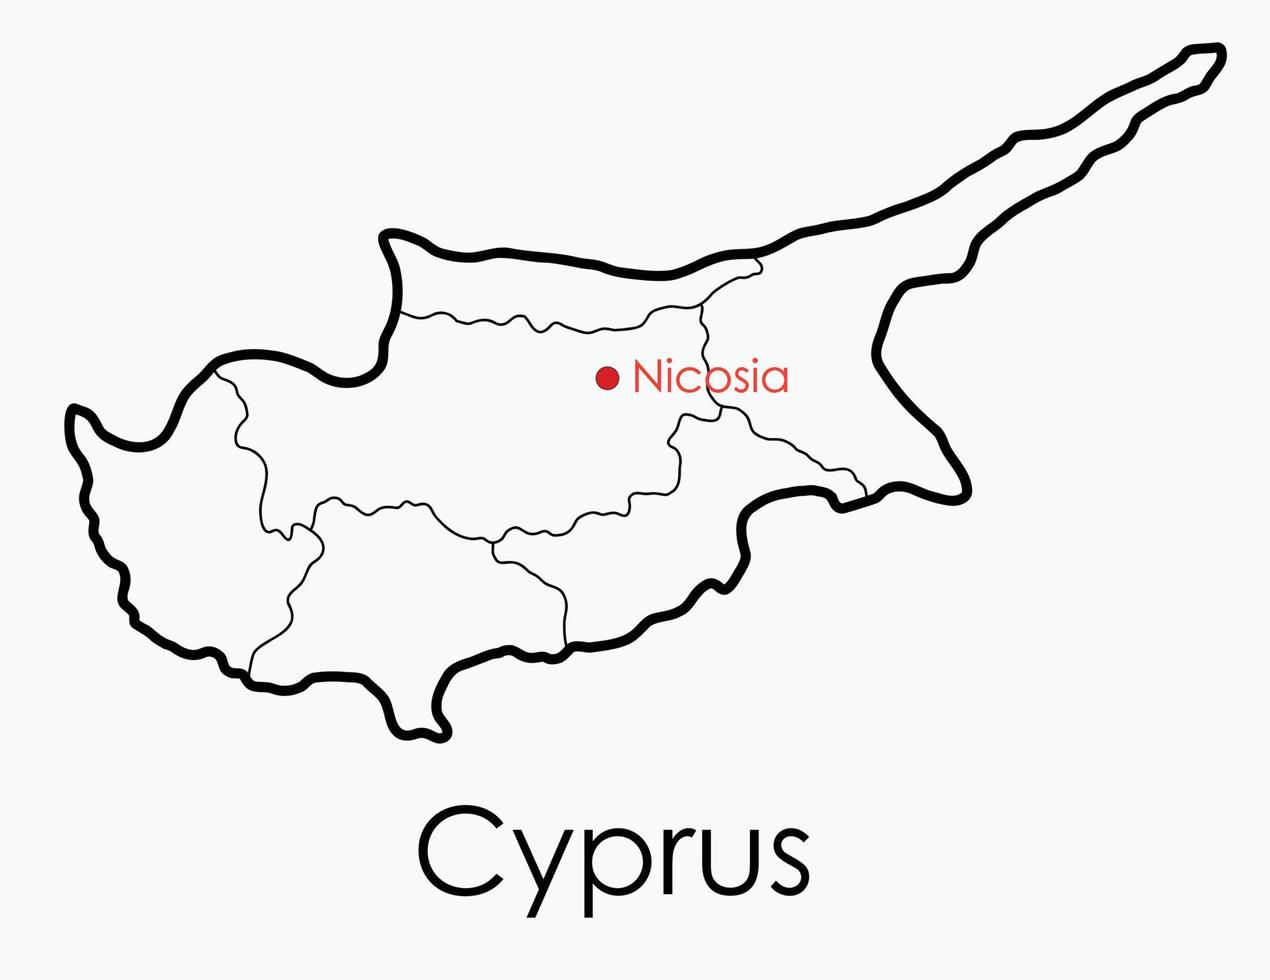 Cyprus map freehand drawing on white background. vector